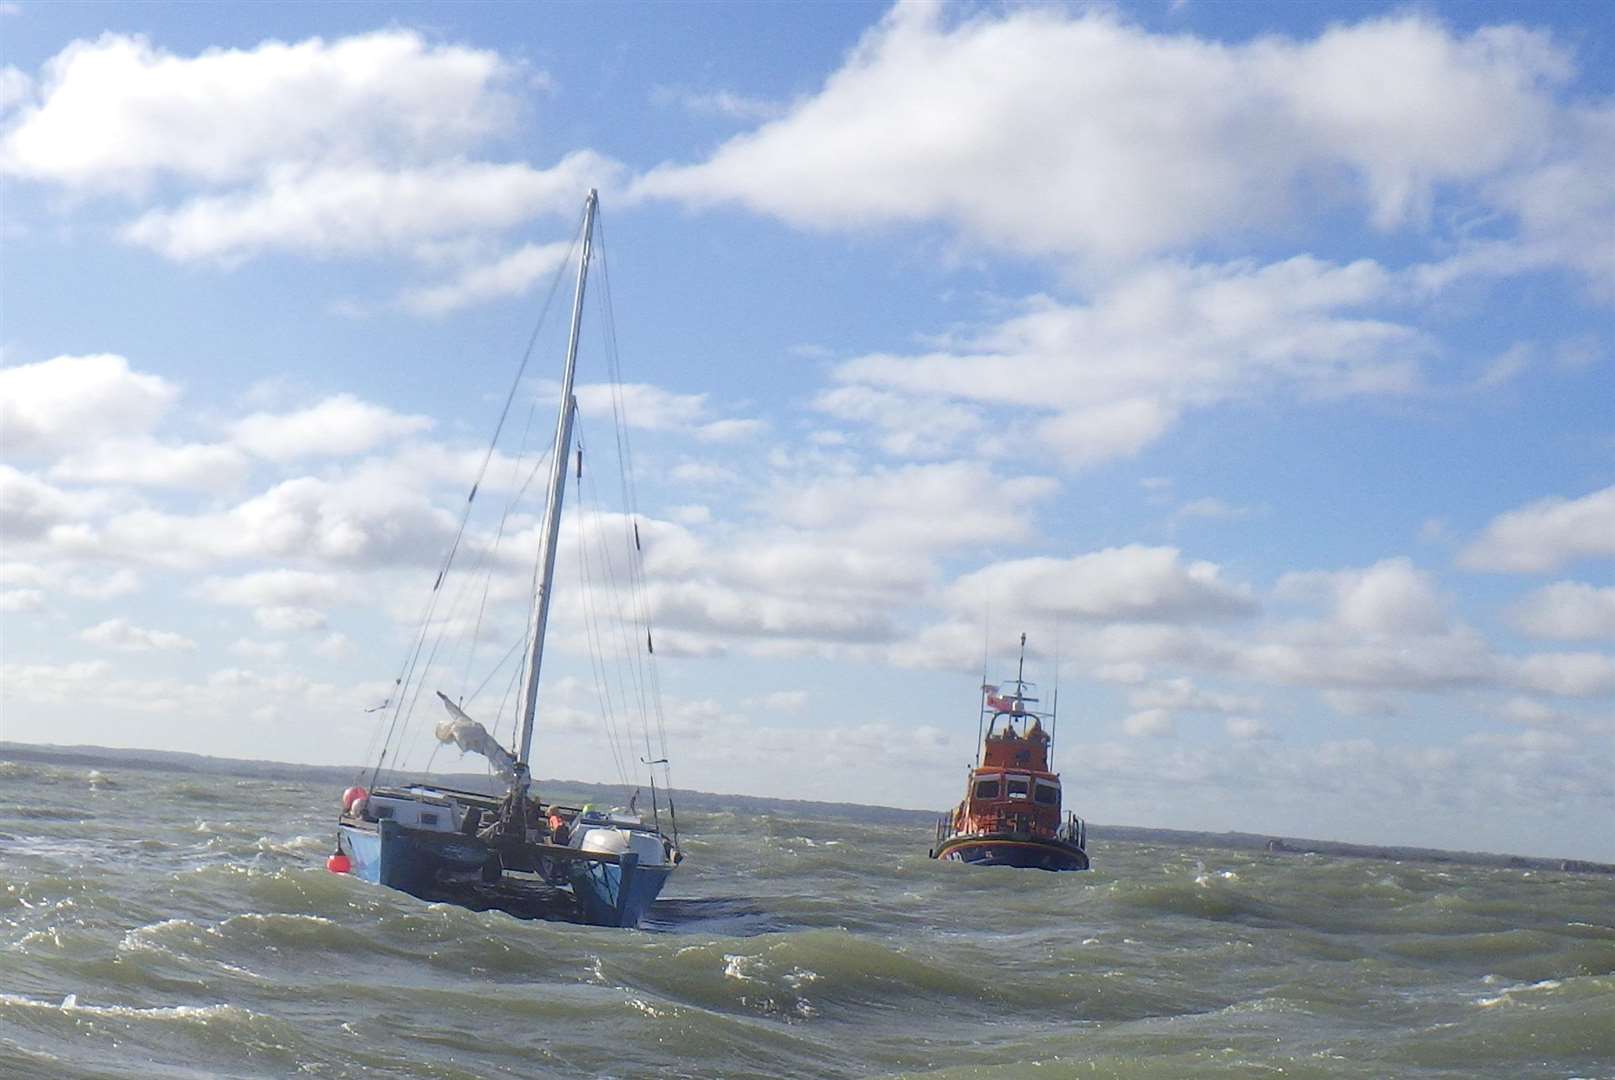 A catamaran was assisted by the RNLI